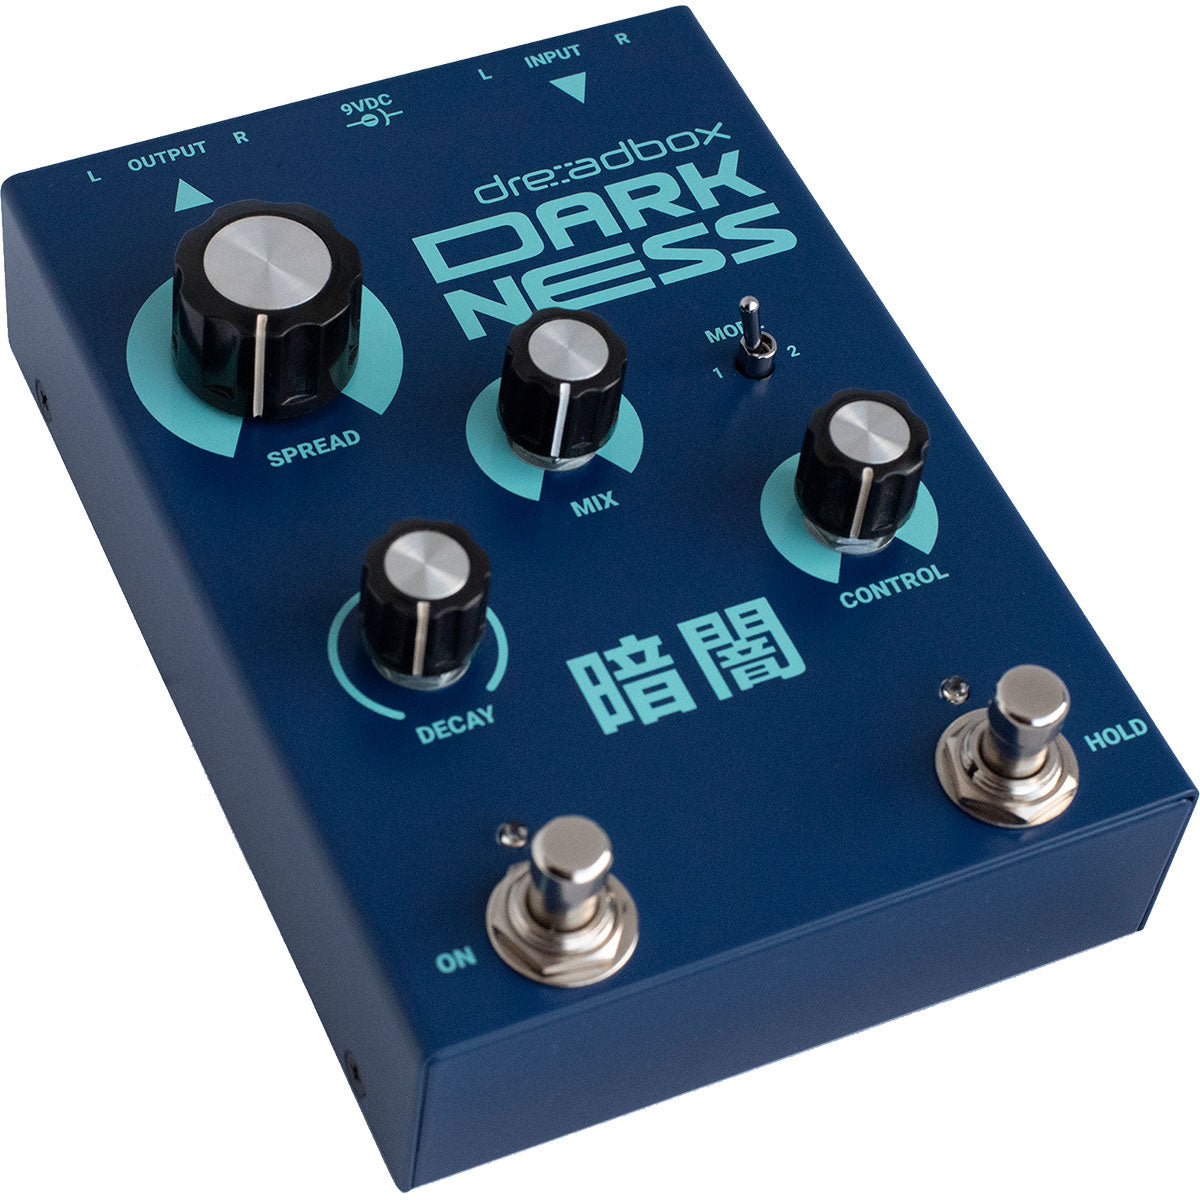 Dreadbox Darkness Stereo Shimmer Reverb Effects Pedal